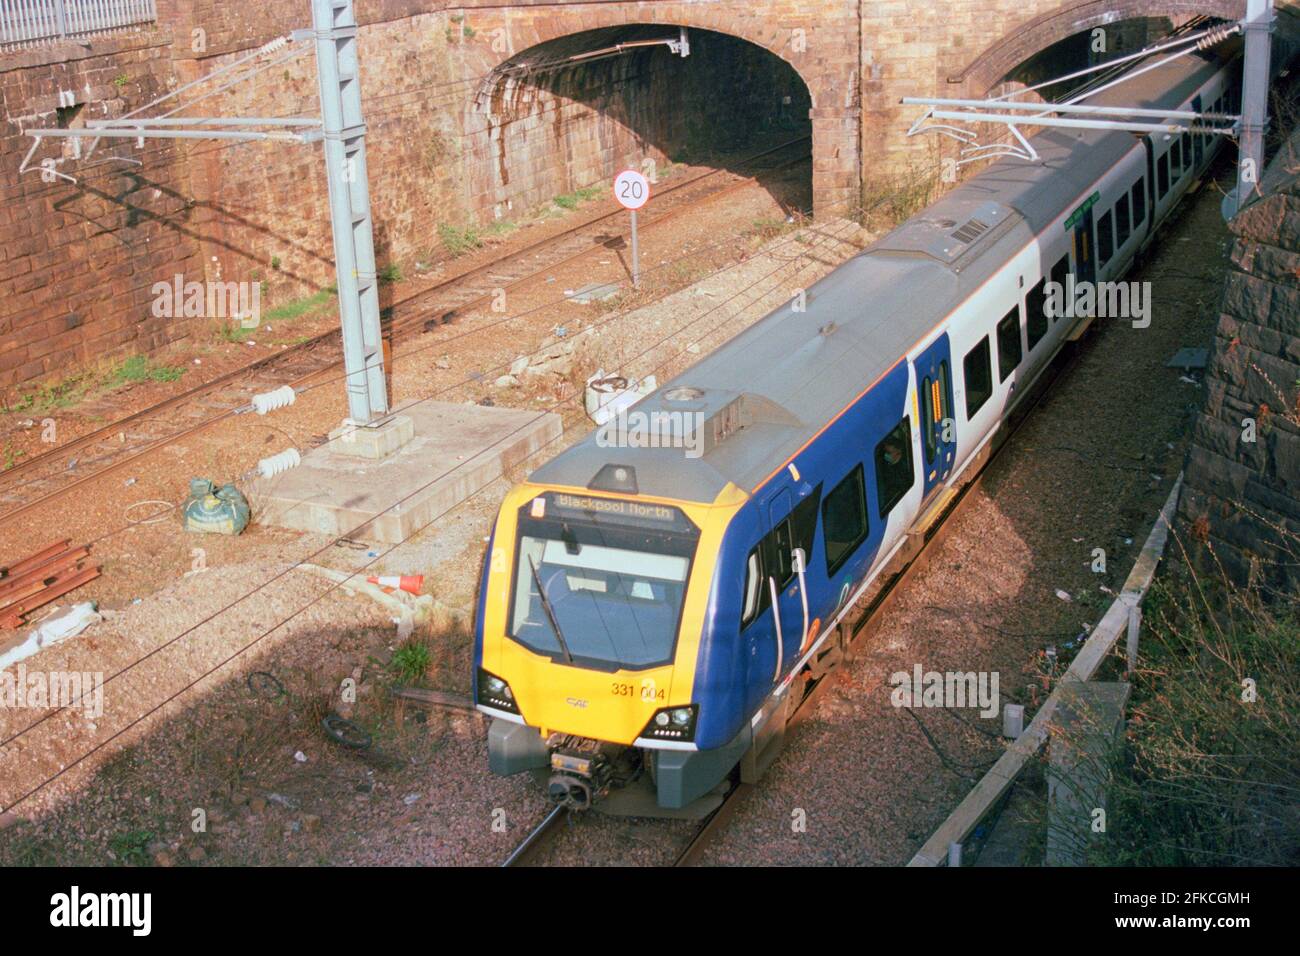 Bolton, UK - March 2021: A Northern train (Class 331) leaving Bolton station. Stock Photo